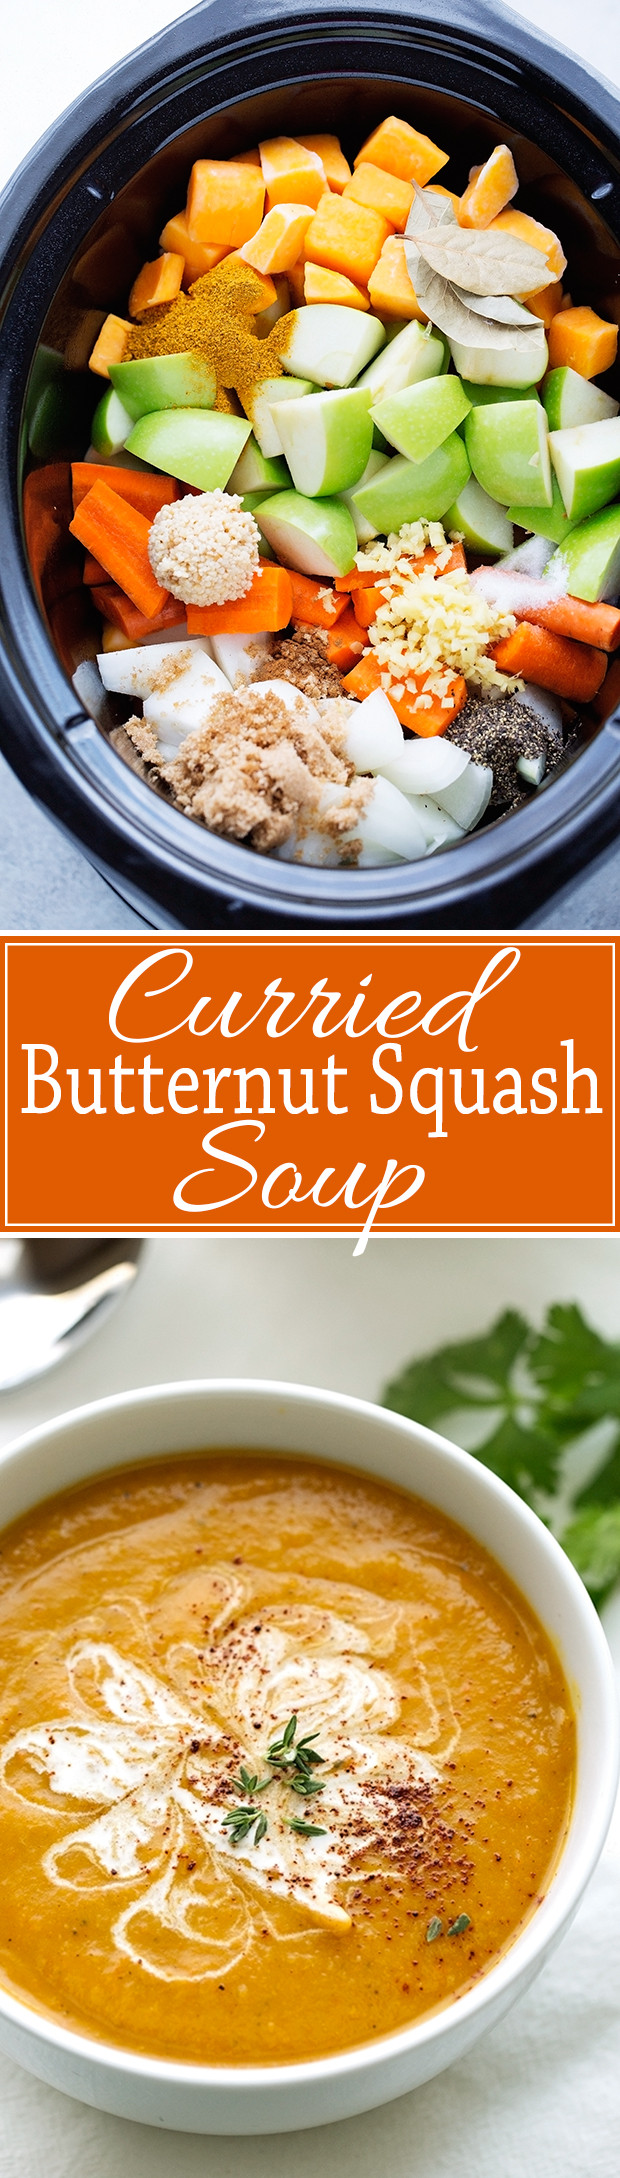 Curried Butternut Squash Soup
 Slow Cooker Curried Butternut Squash Soup Recipe